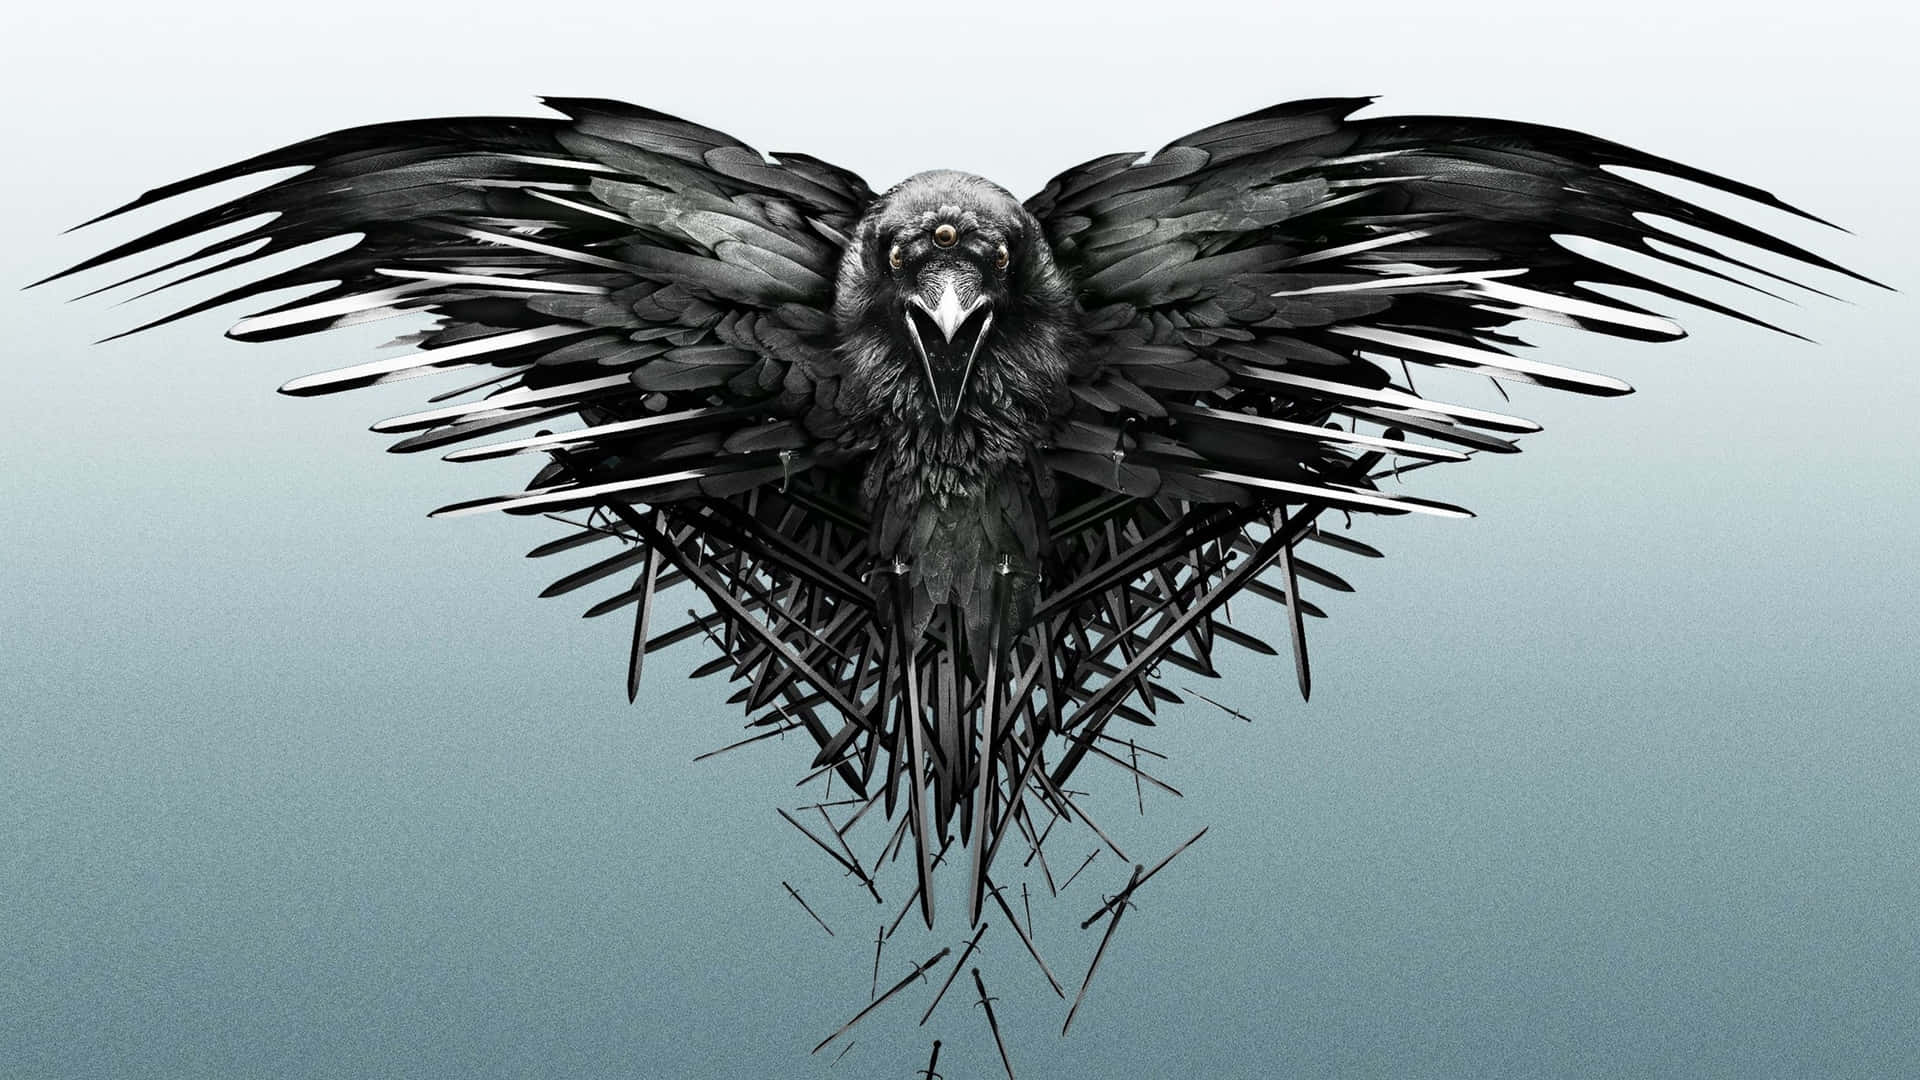 Game Of Thrones - Crow